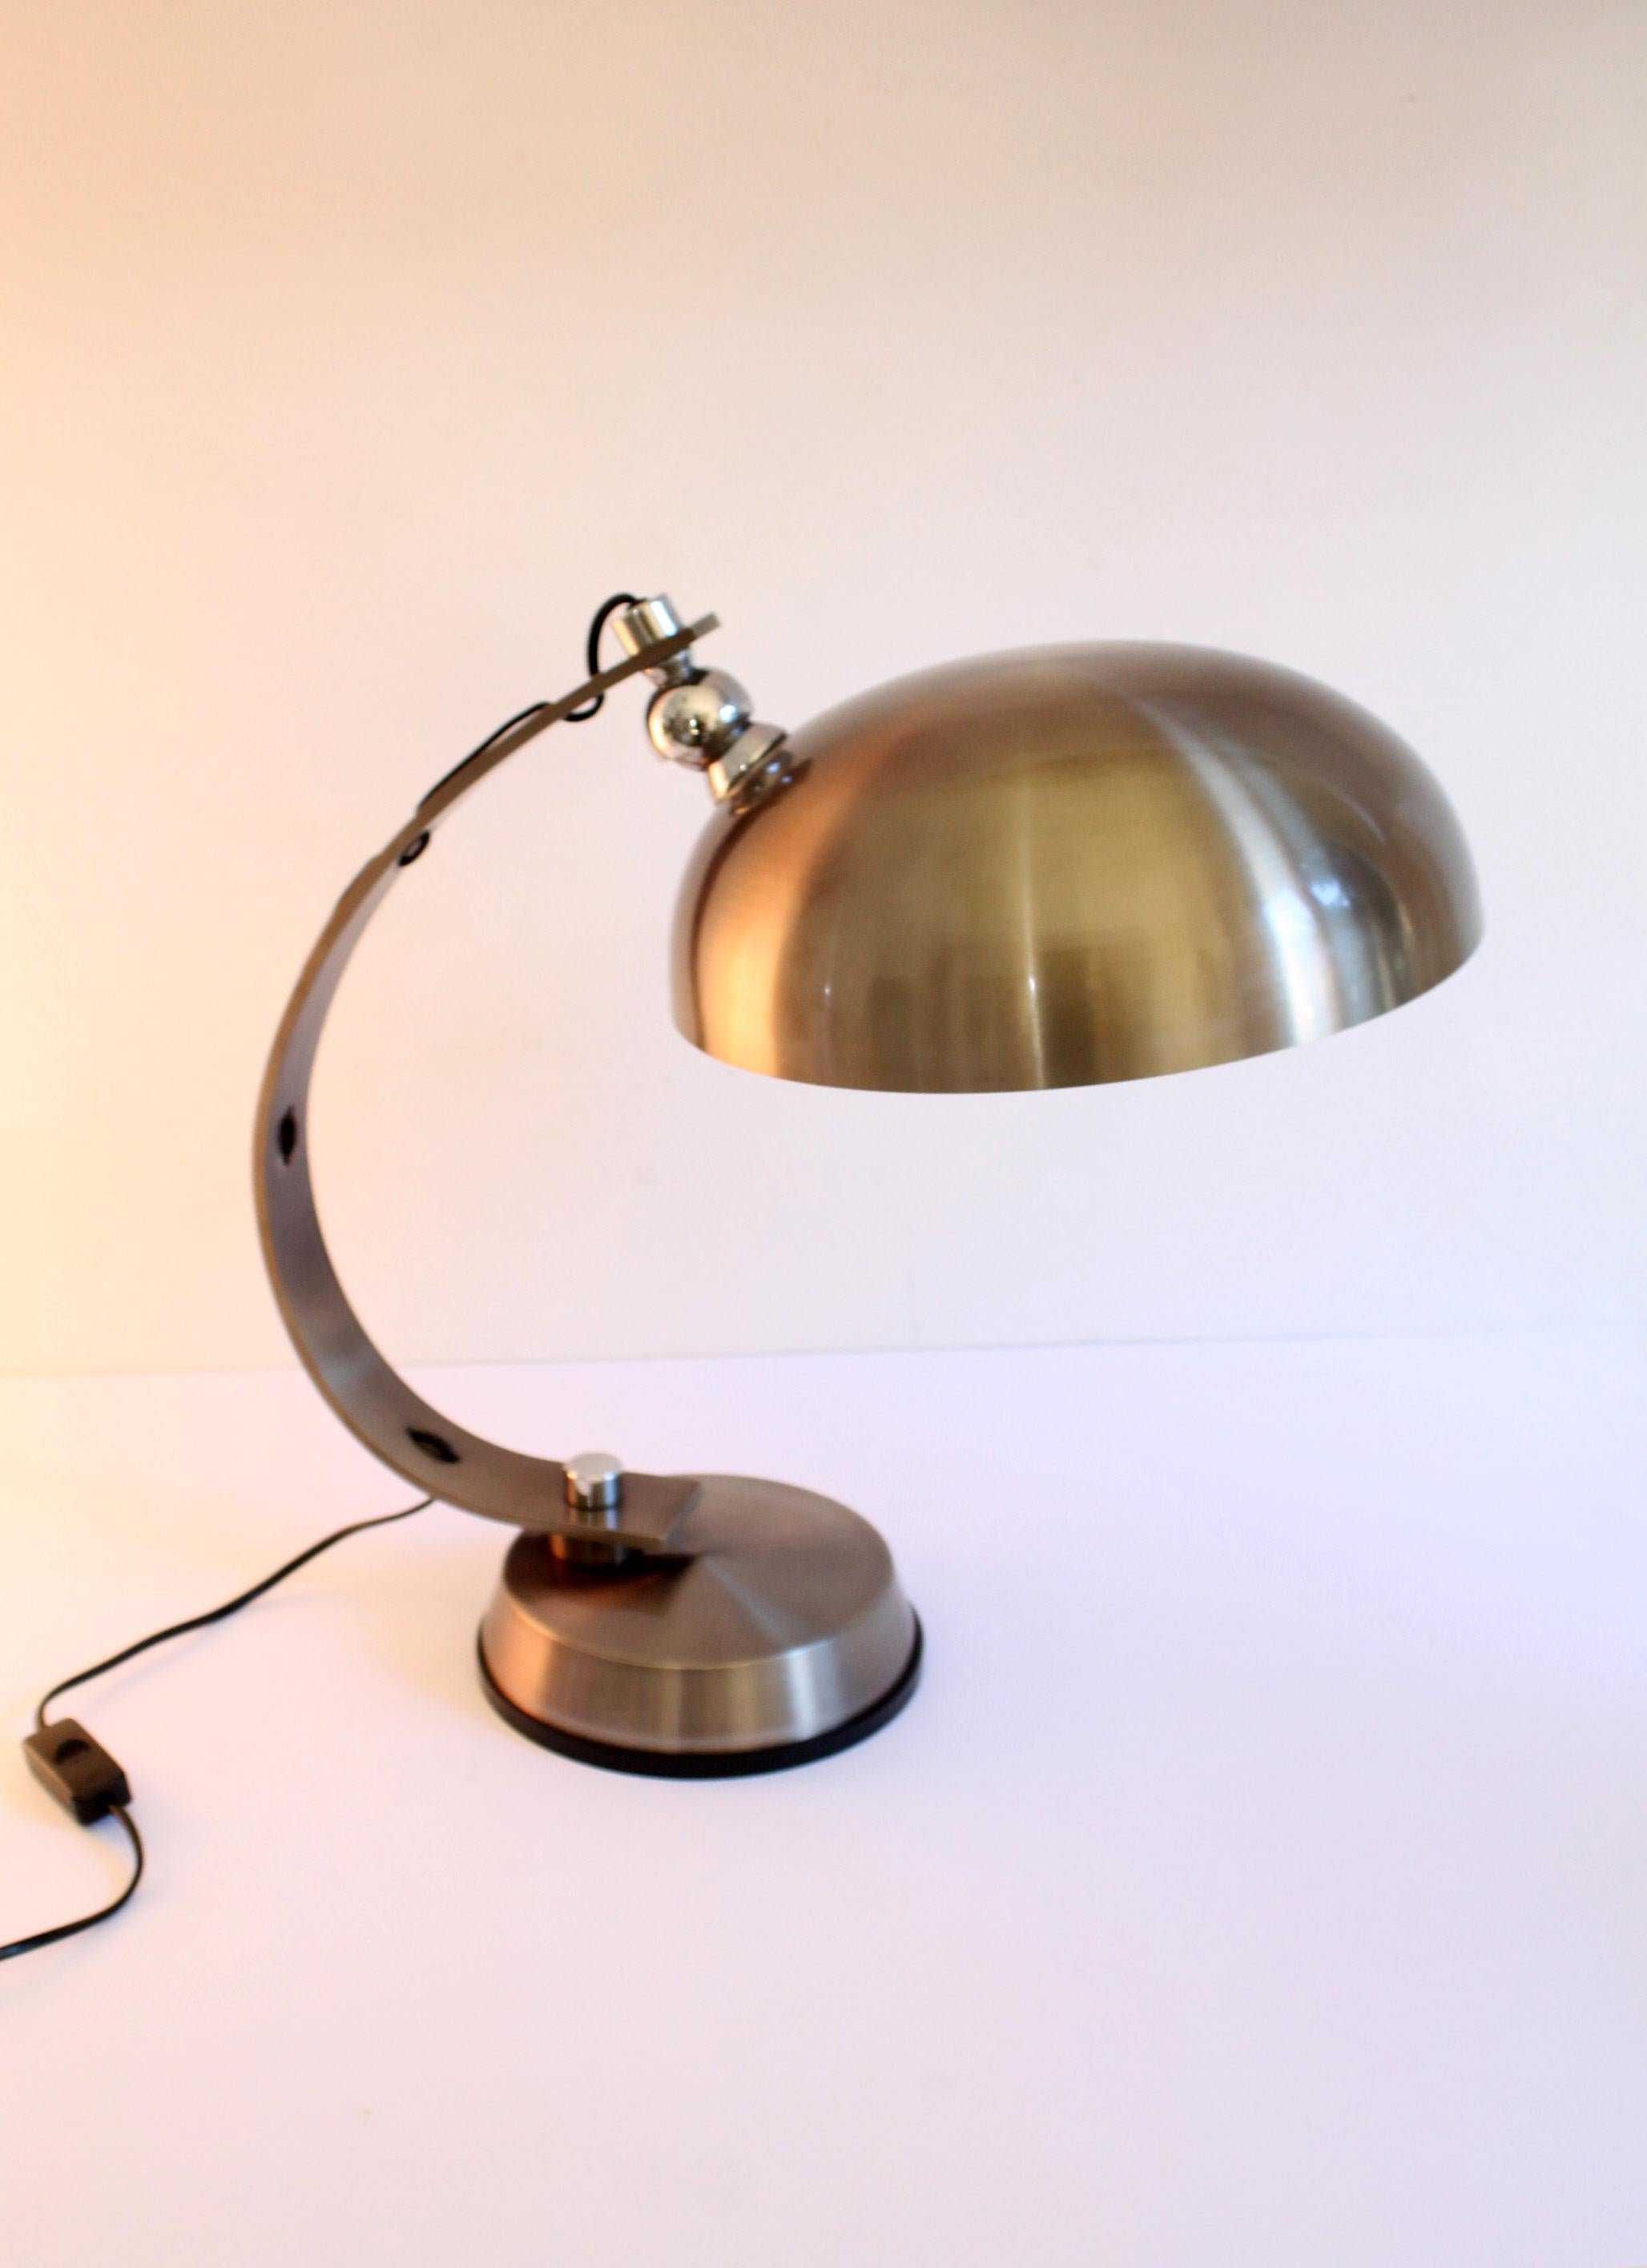 This is an Italian ministerial desk lamp in brass / bronzed metal and chromed steel details from the 1950s. It has a beautiful circular coated white halo inside to filter the direct light.

Manufacteur: Arredoluce
Dimensions: 51hx30x46cm
Period: